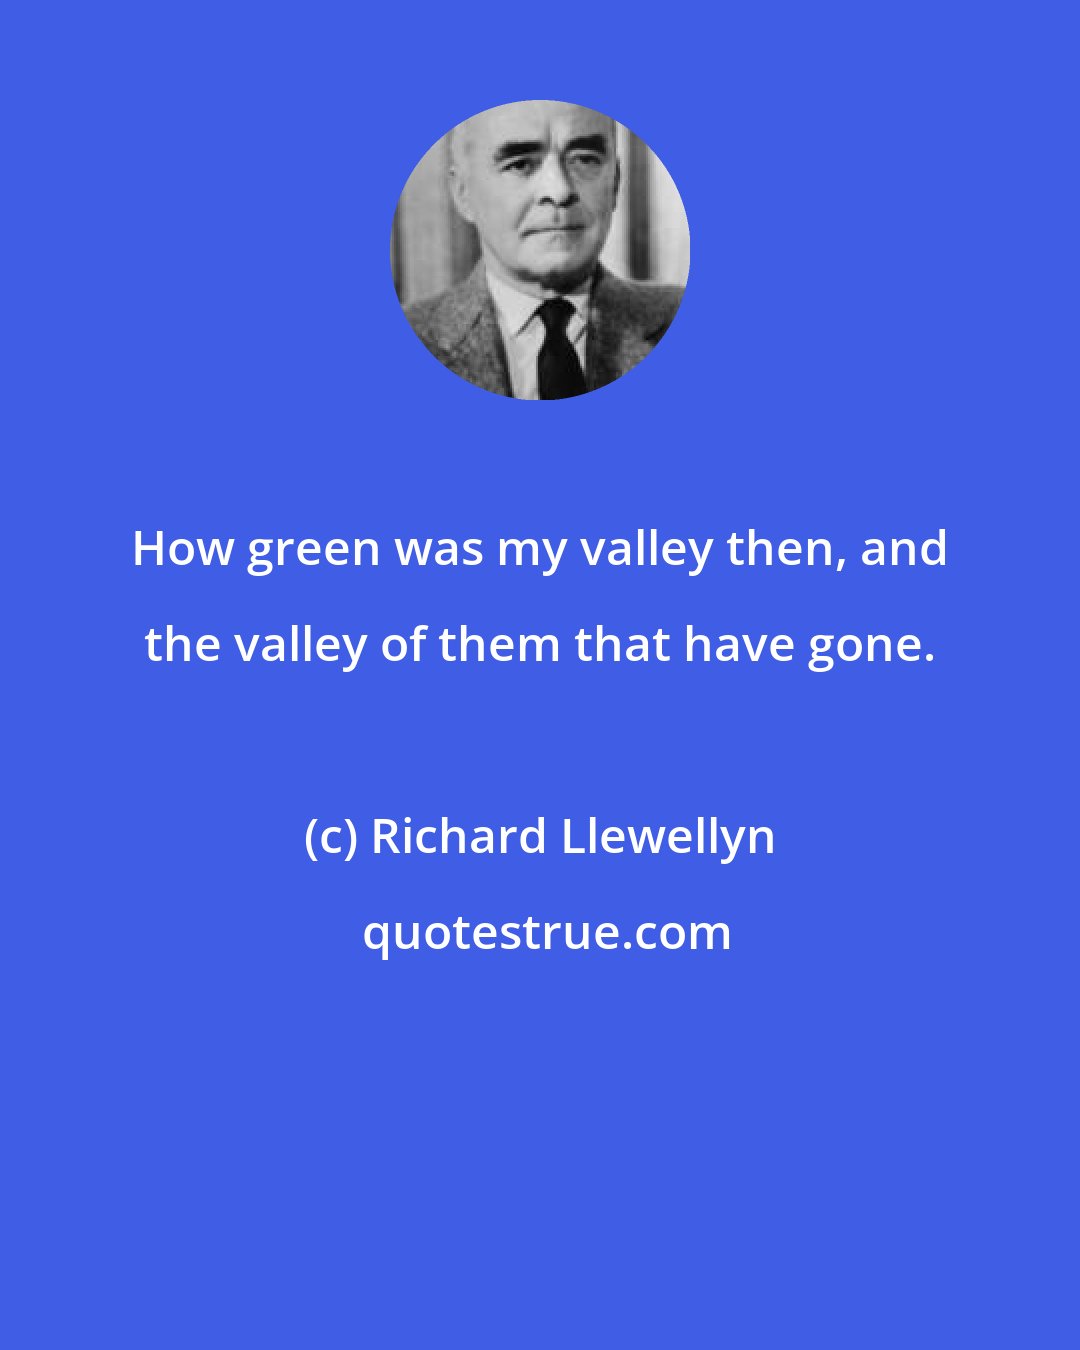 Richard Llewellyn: How green was my valley then, and the valley of them that have gone.